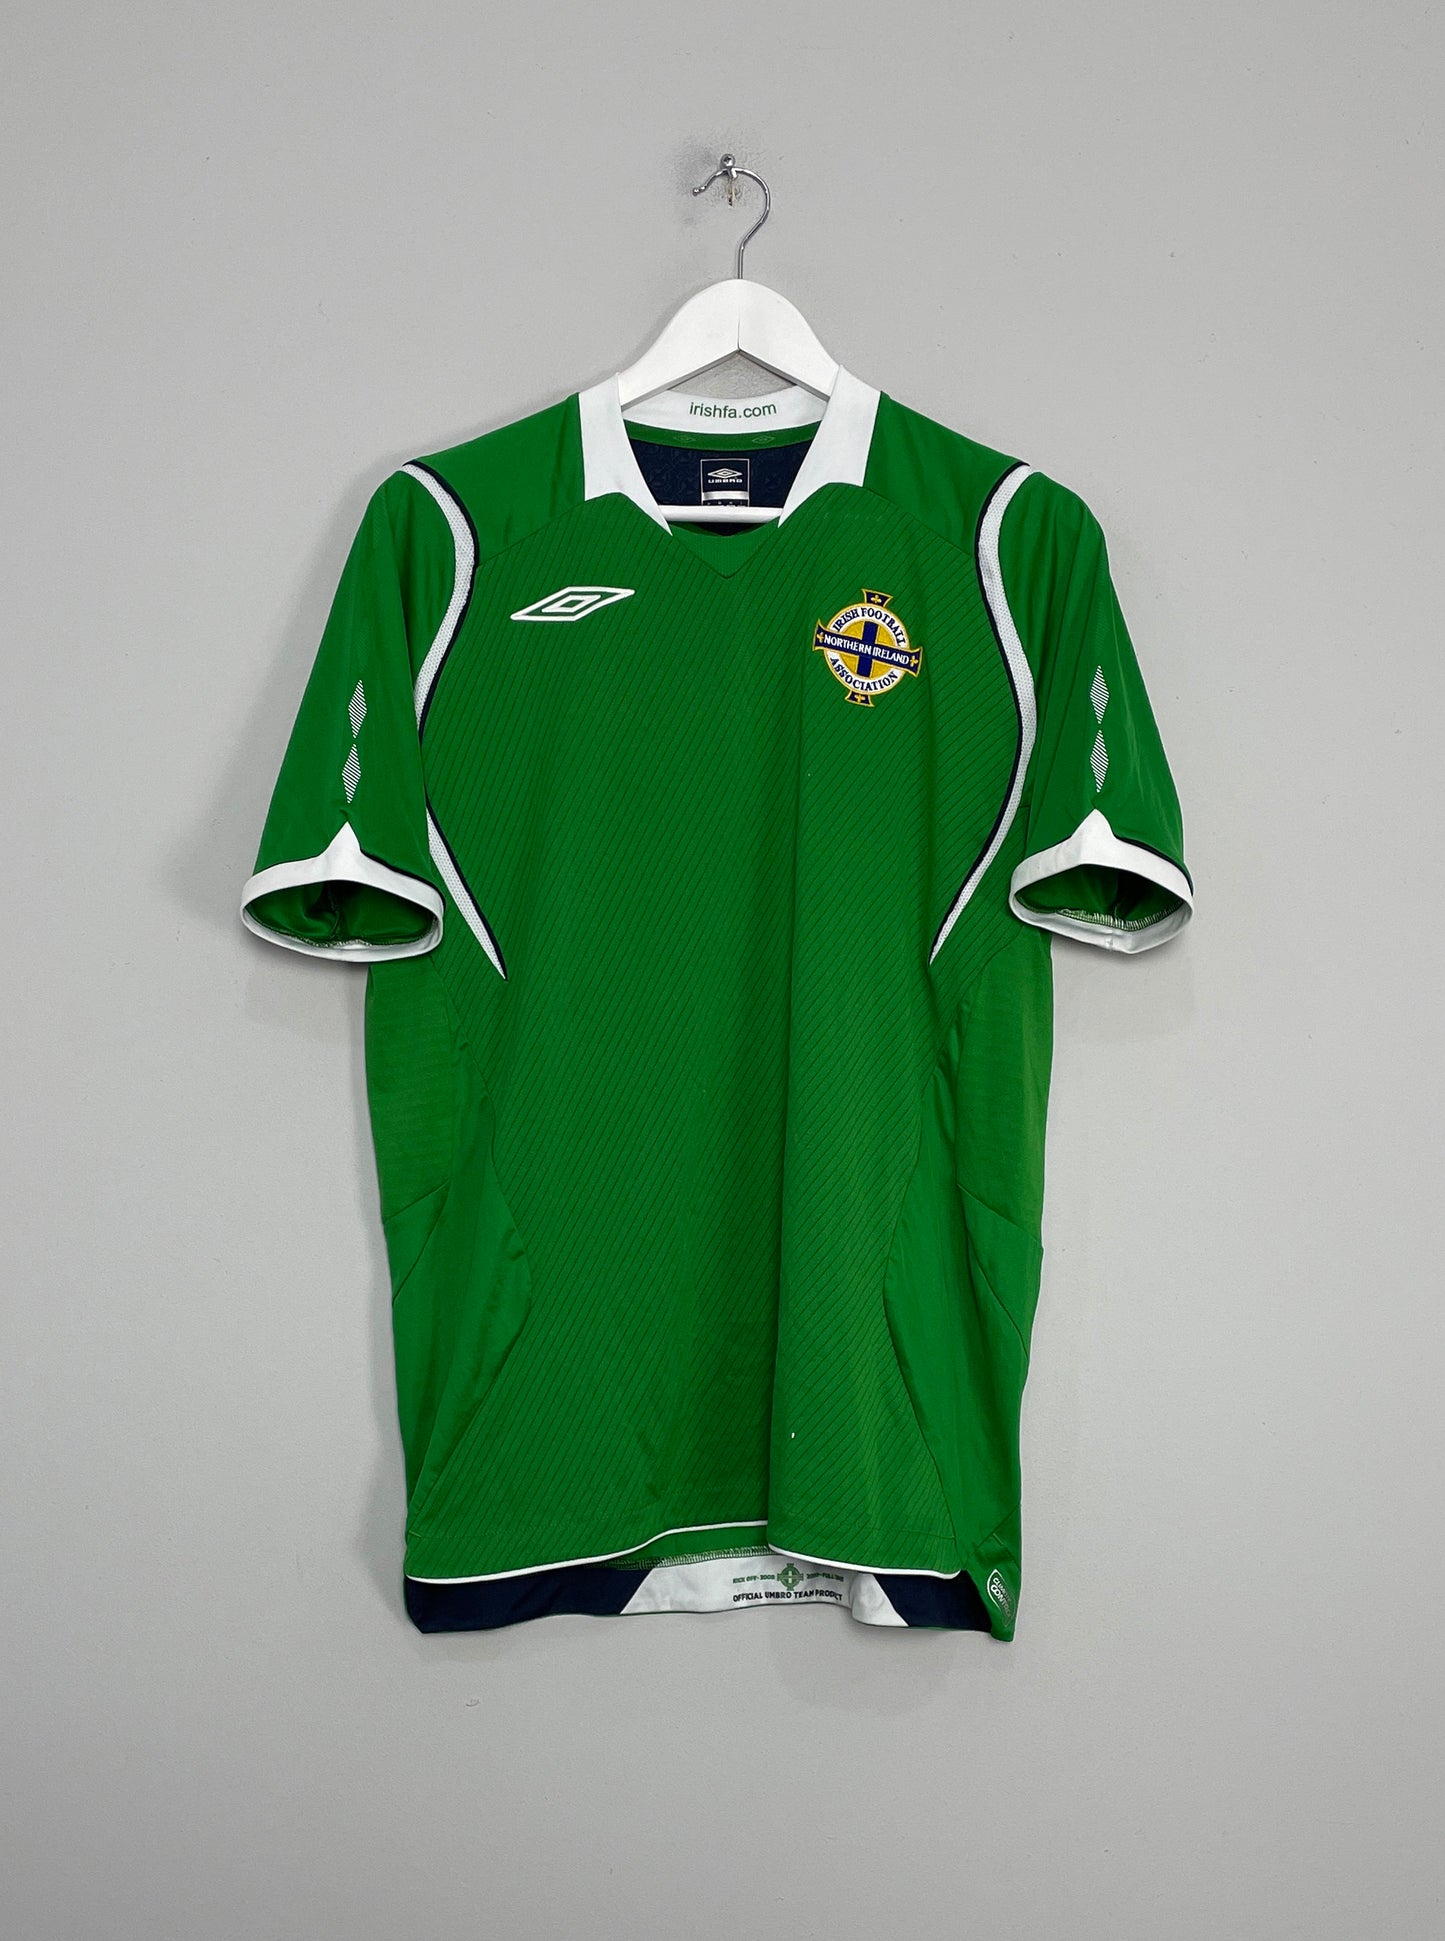 Image of the Northern Ireland shirt from the 2008/09 season